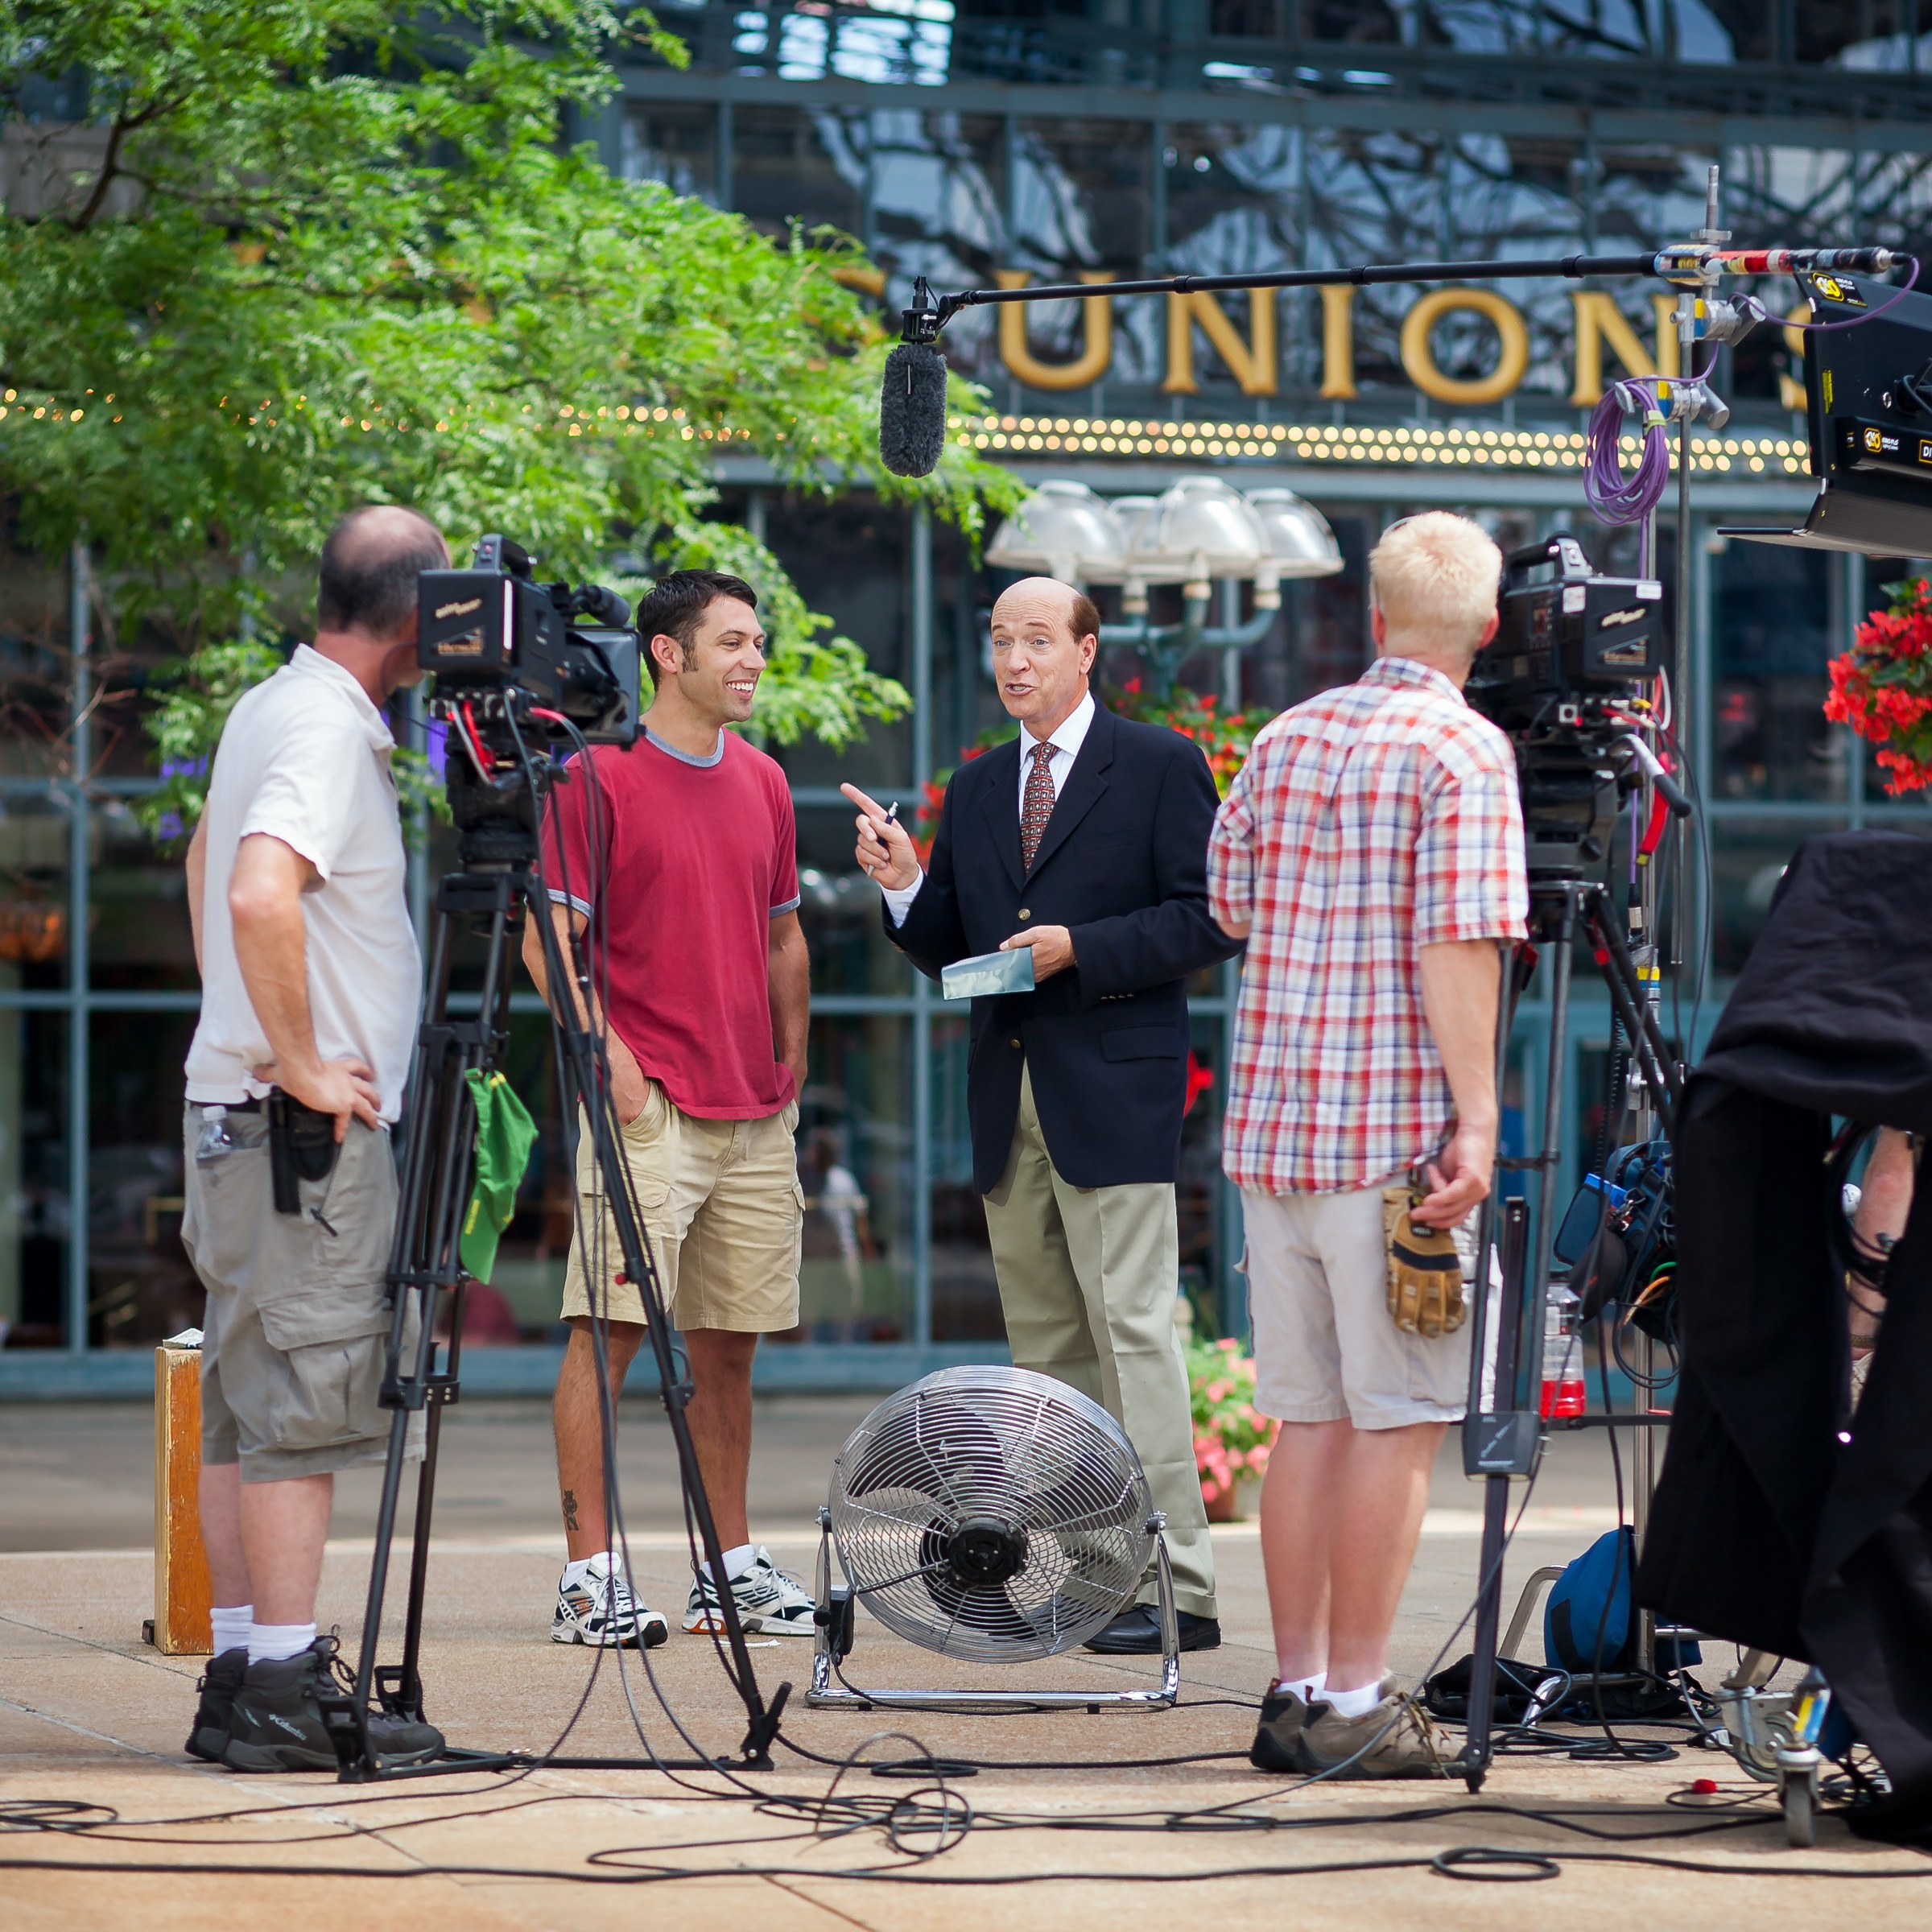 Video Production Crew working at St. Louis Union Station in St. Louis, MO.